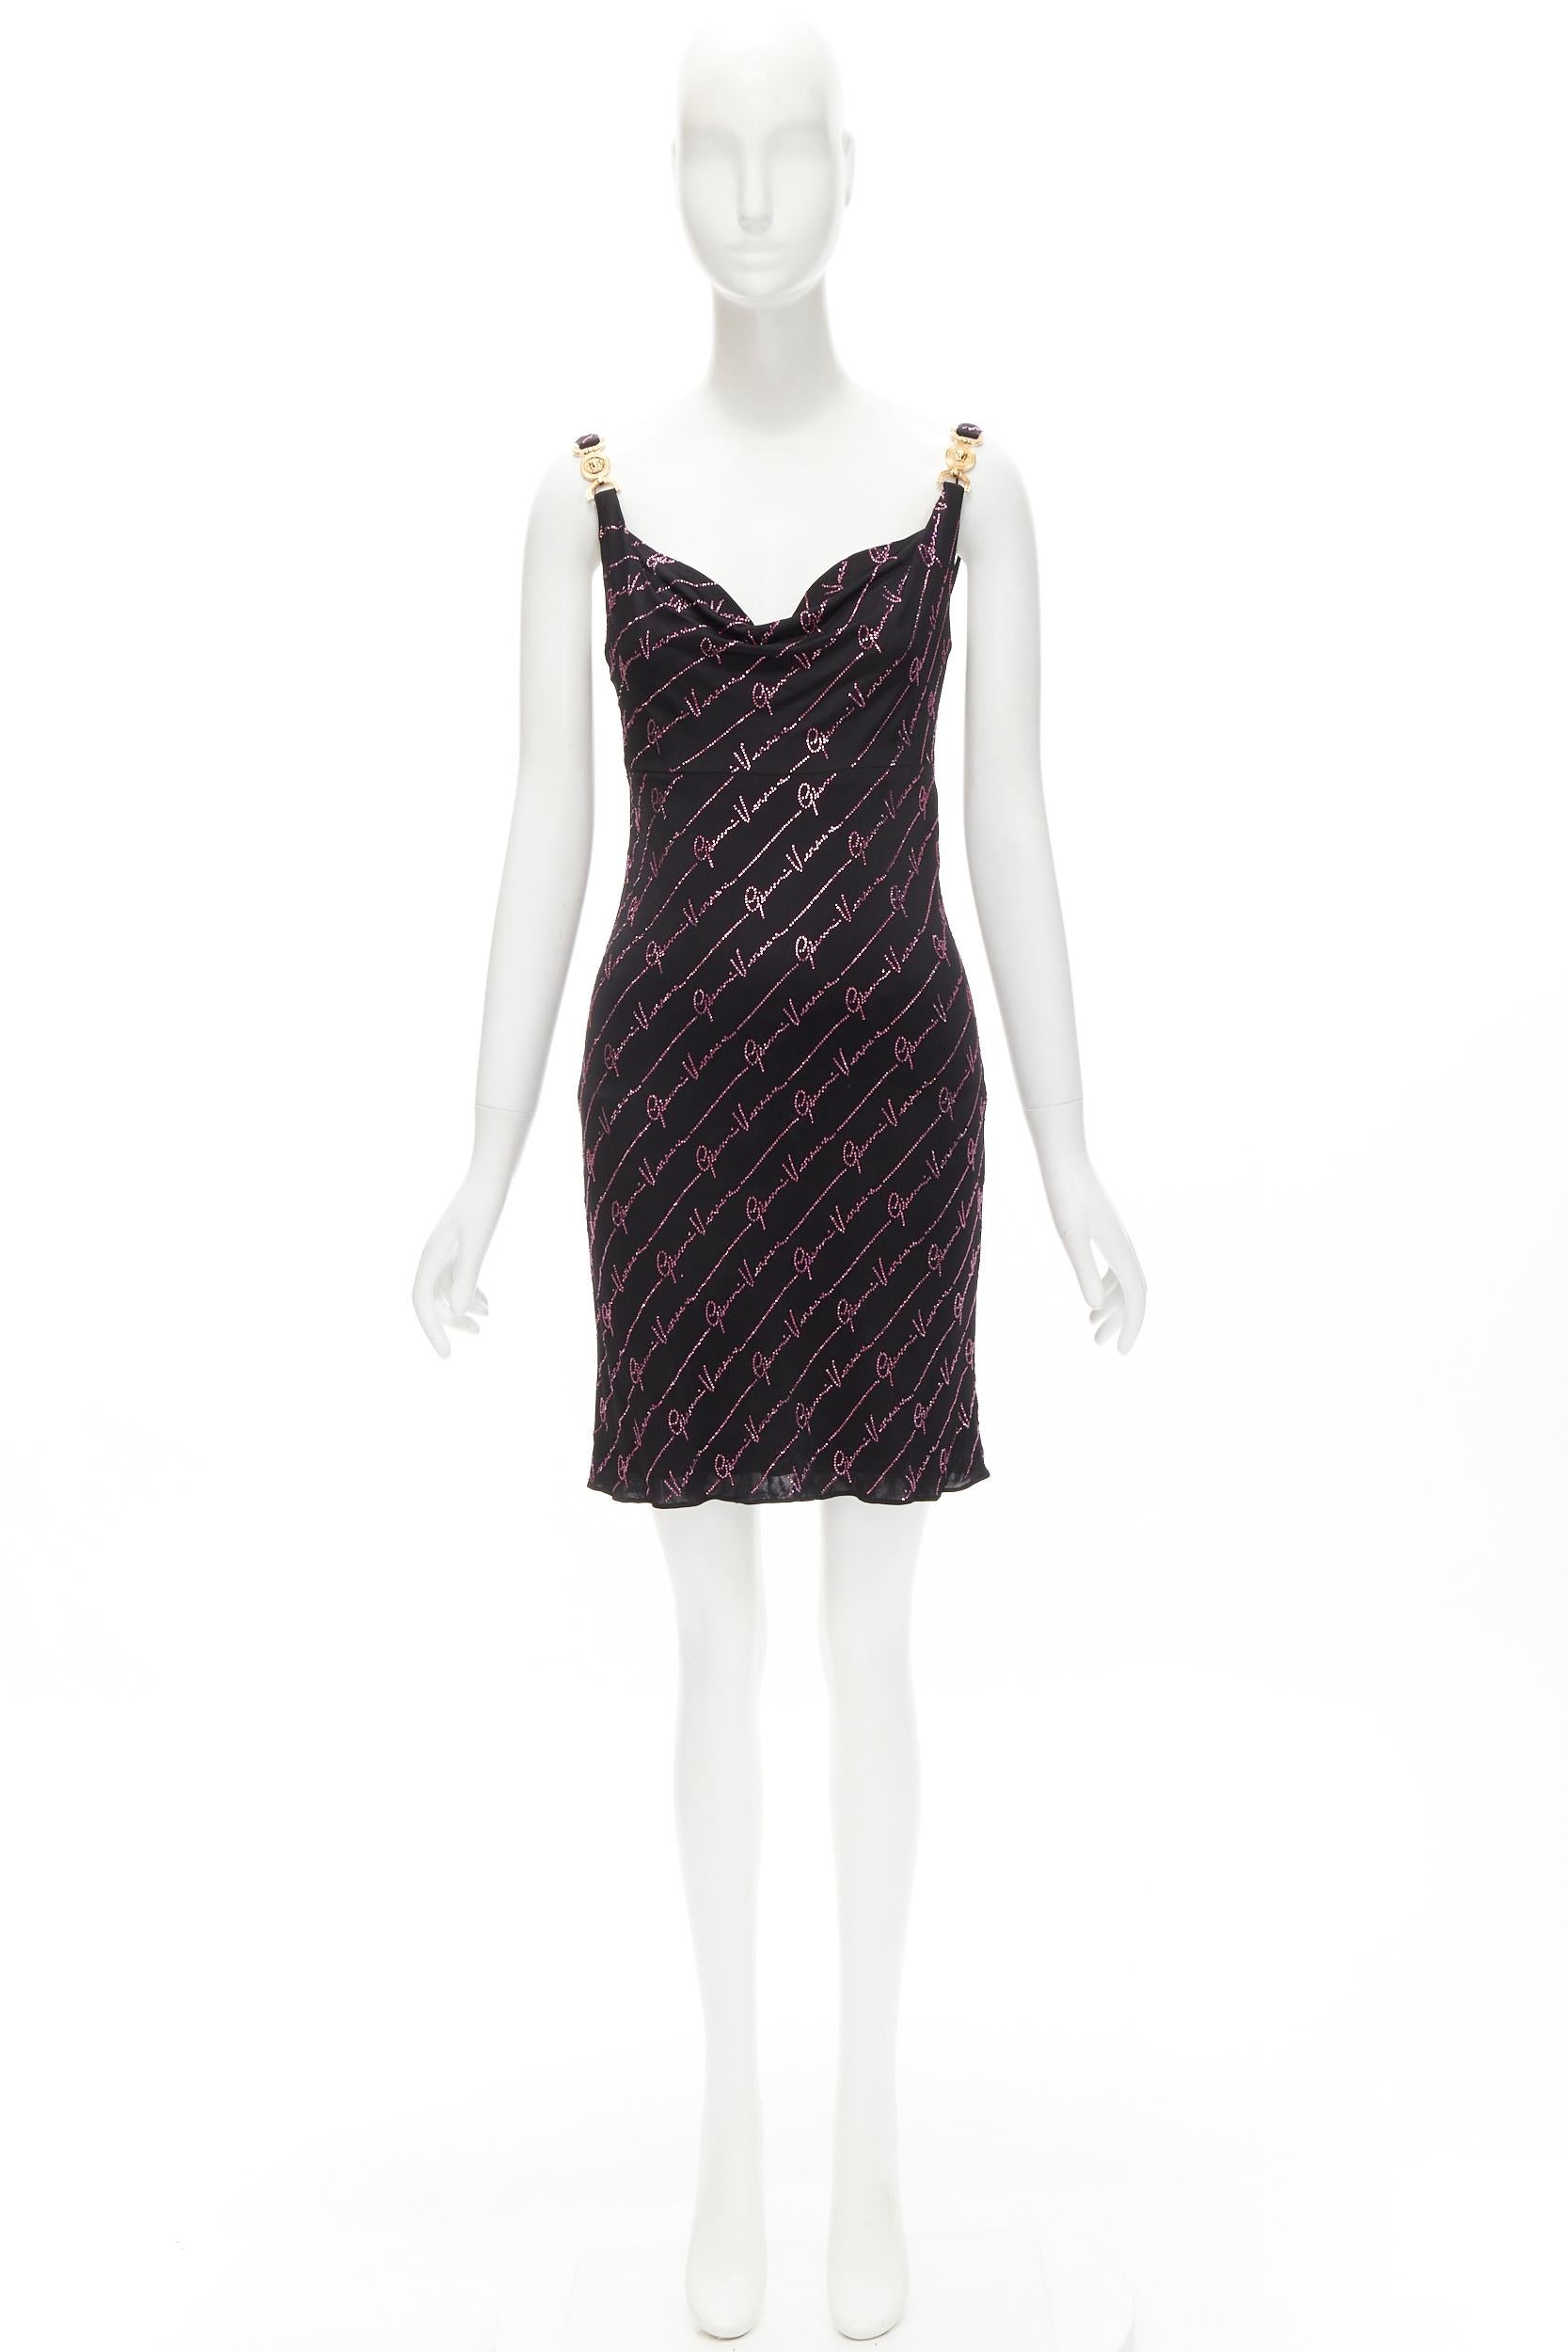 new VERSACE Gianni Signature black pink crystal encrusted Medusa dress IT40 S For Sale 4